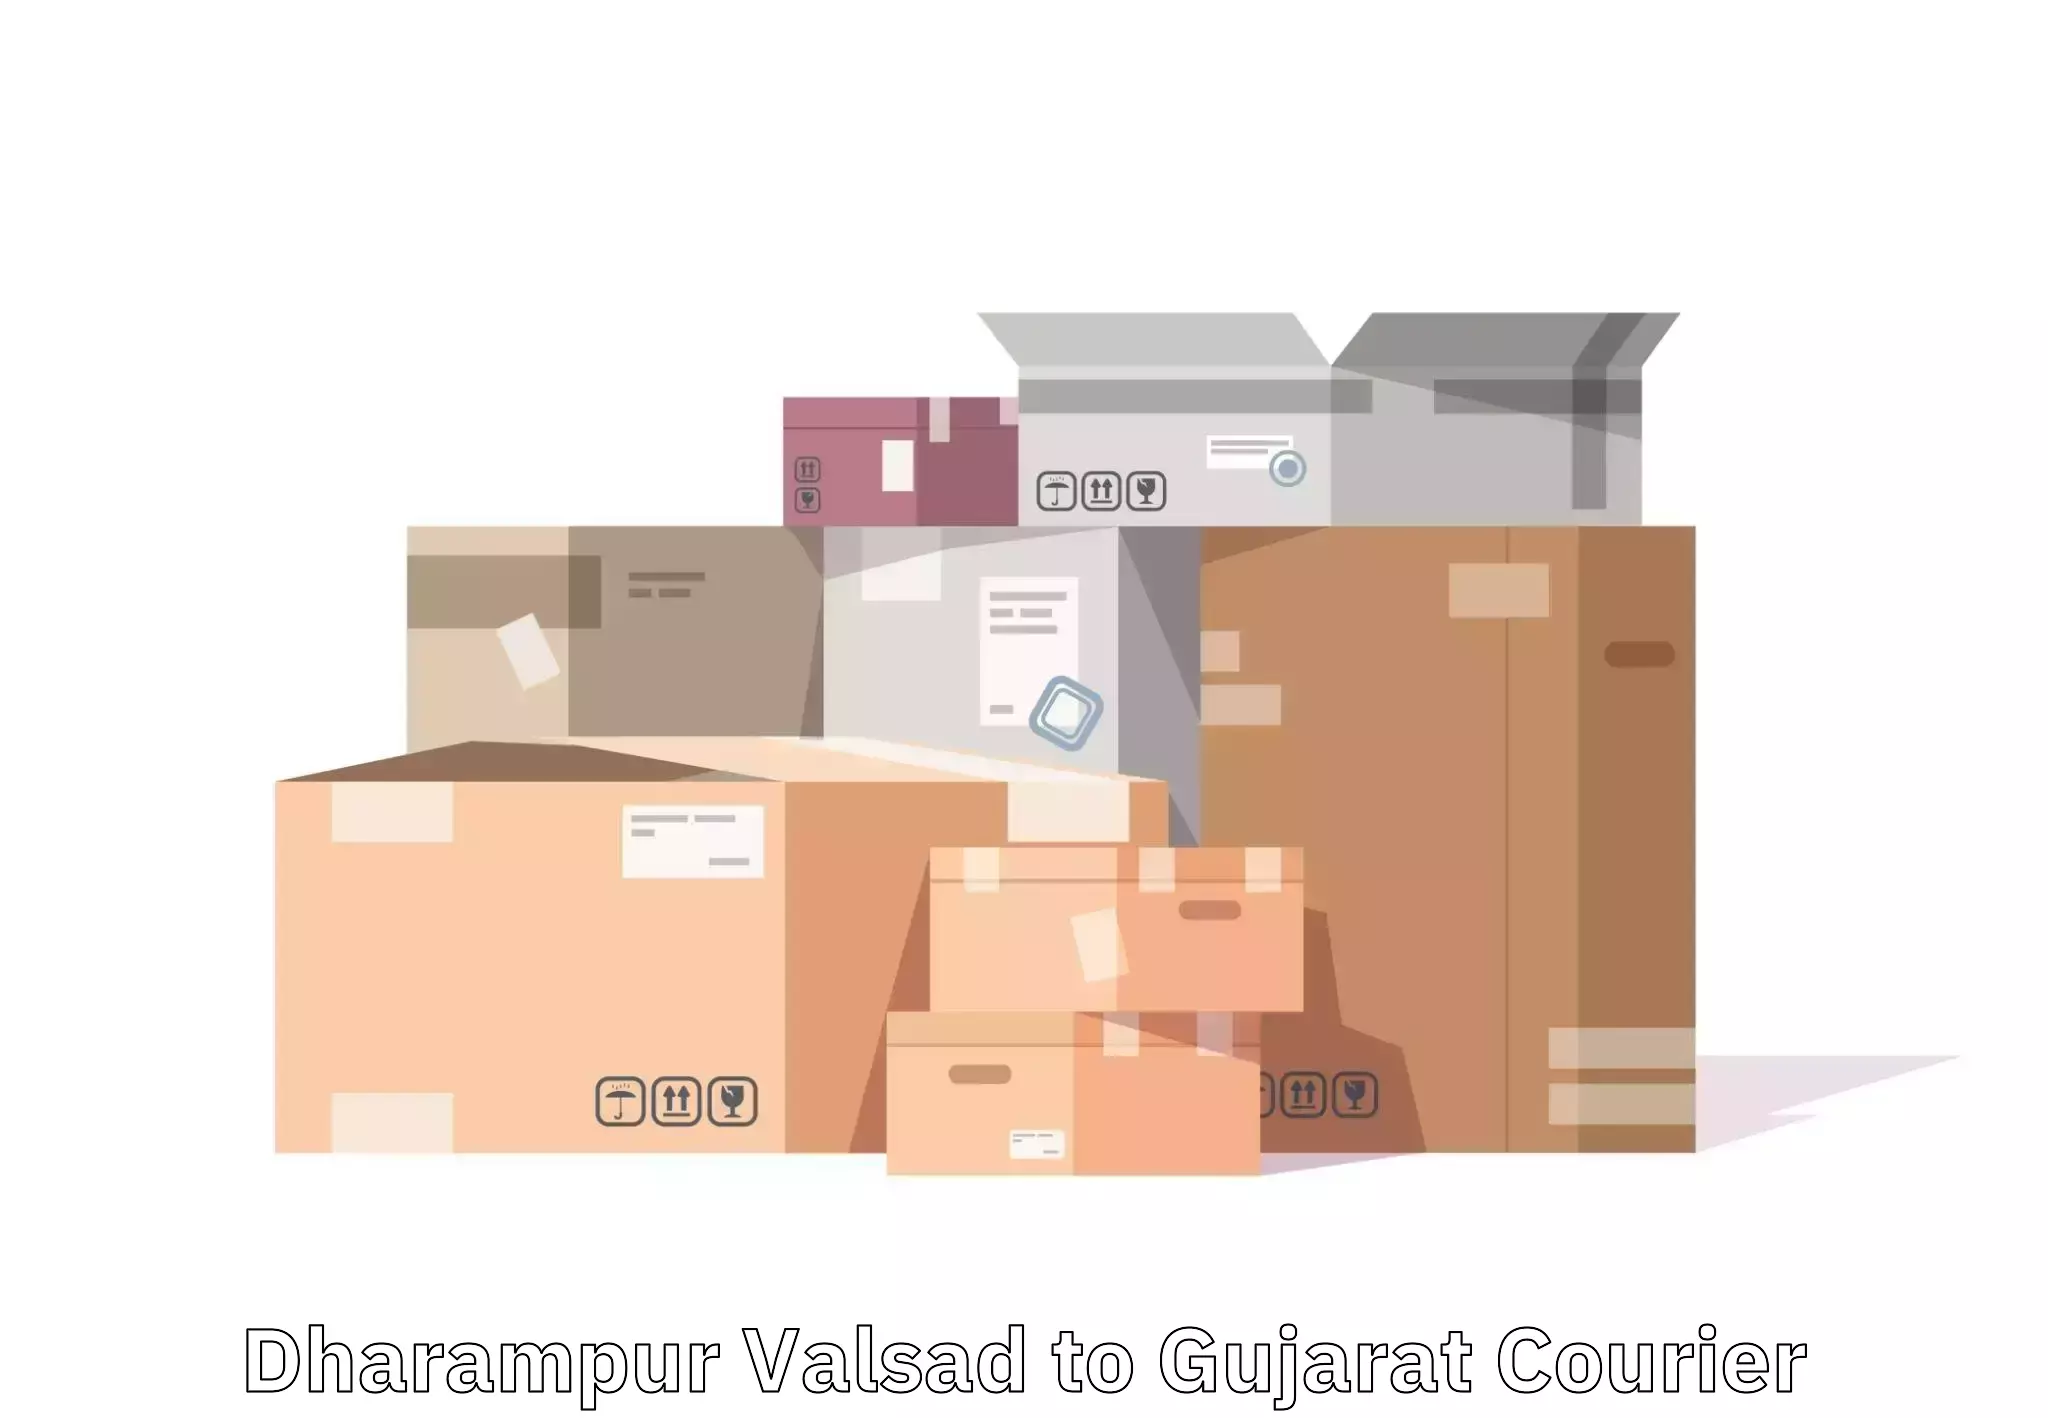 Online luggage shipping booking Dharampur Valsad to Umreth